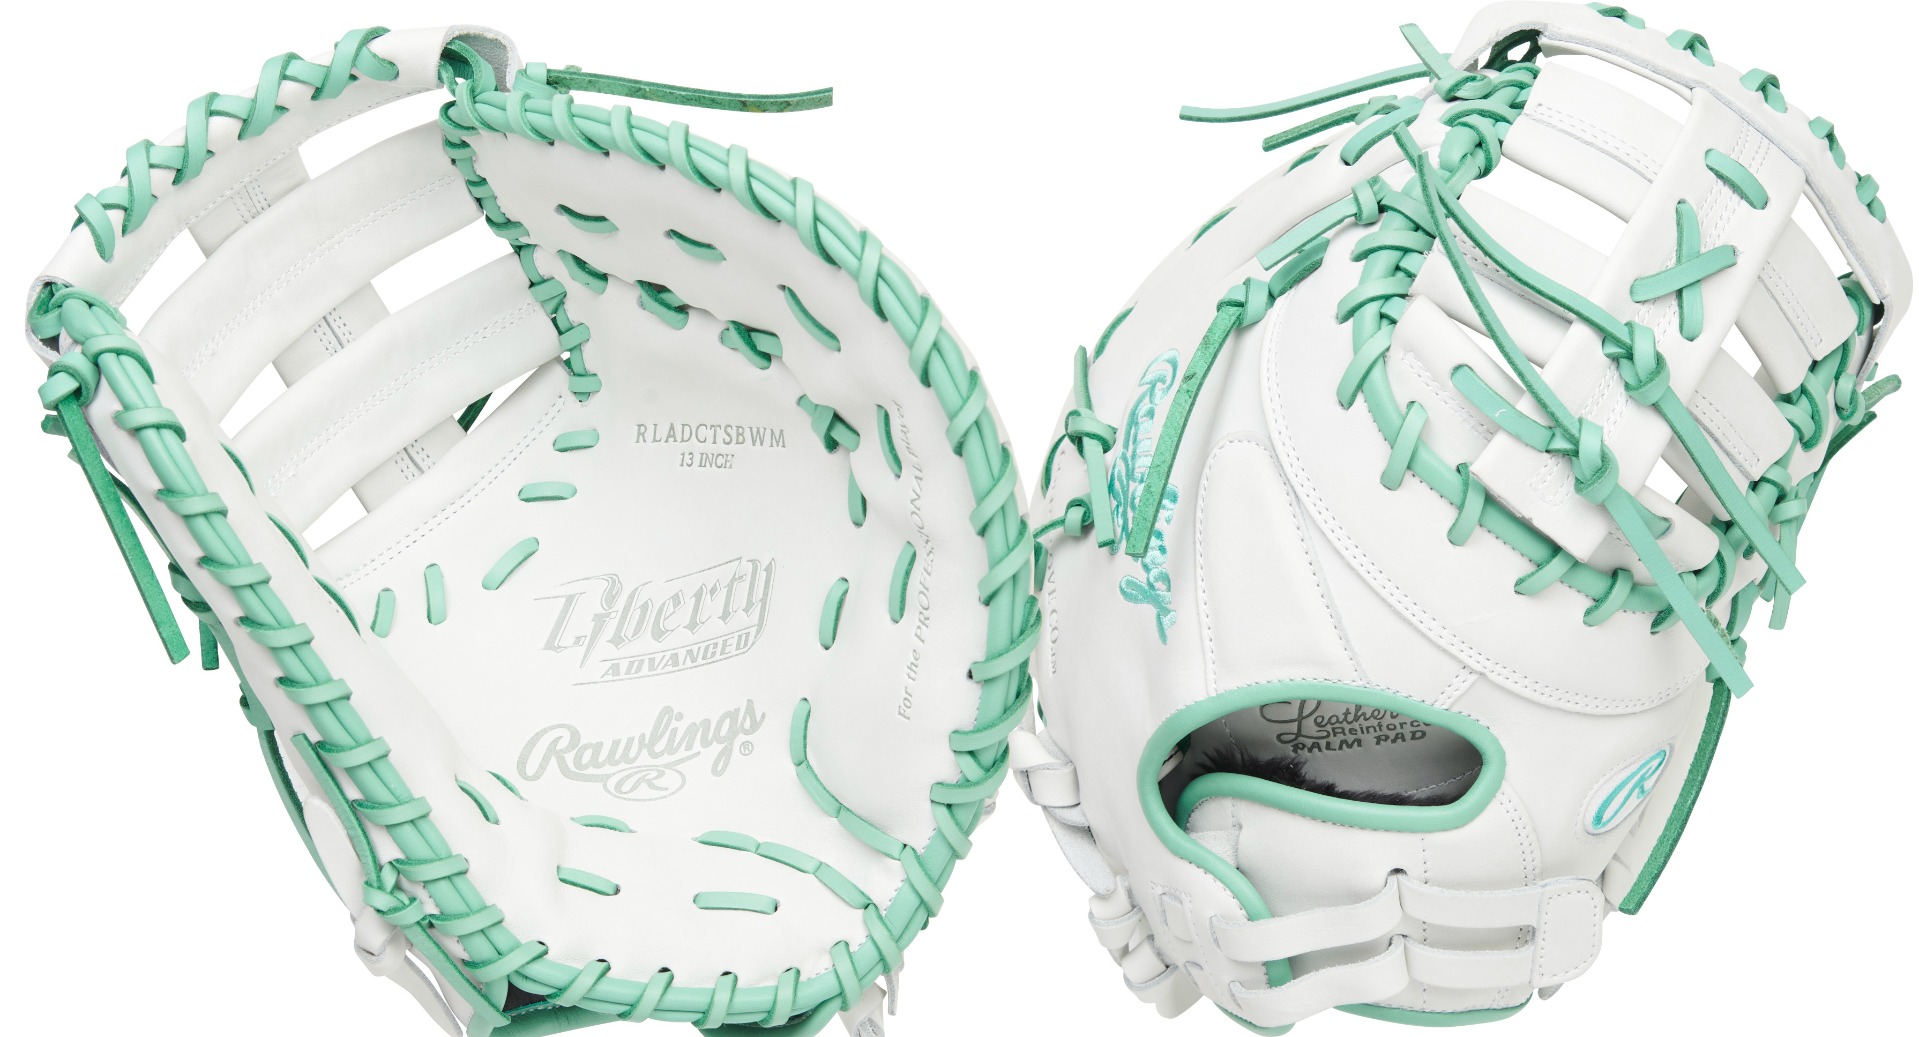 13 Rawlings Liberty Advanced 2022 Color Series RLADCTSBWM Fastpitch 1st Base Mitt 